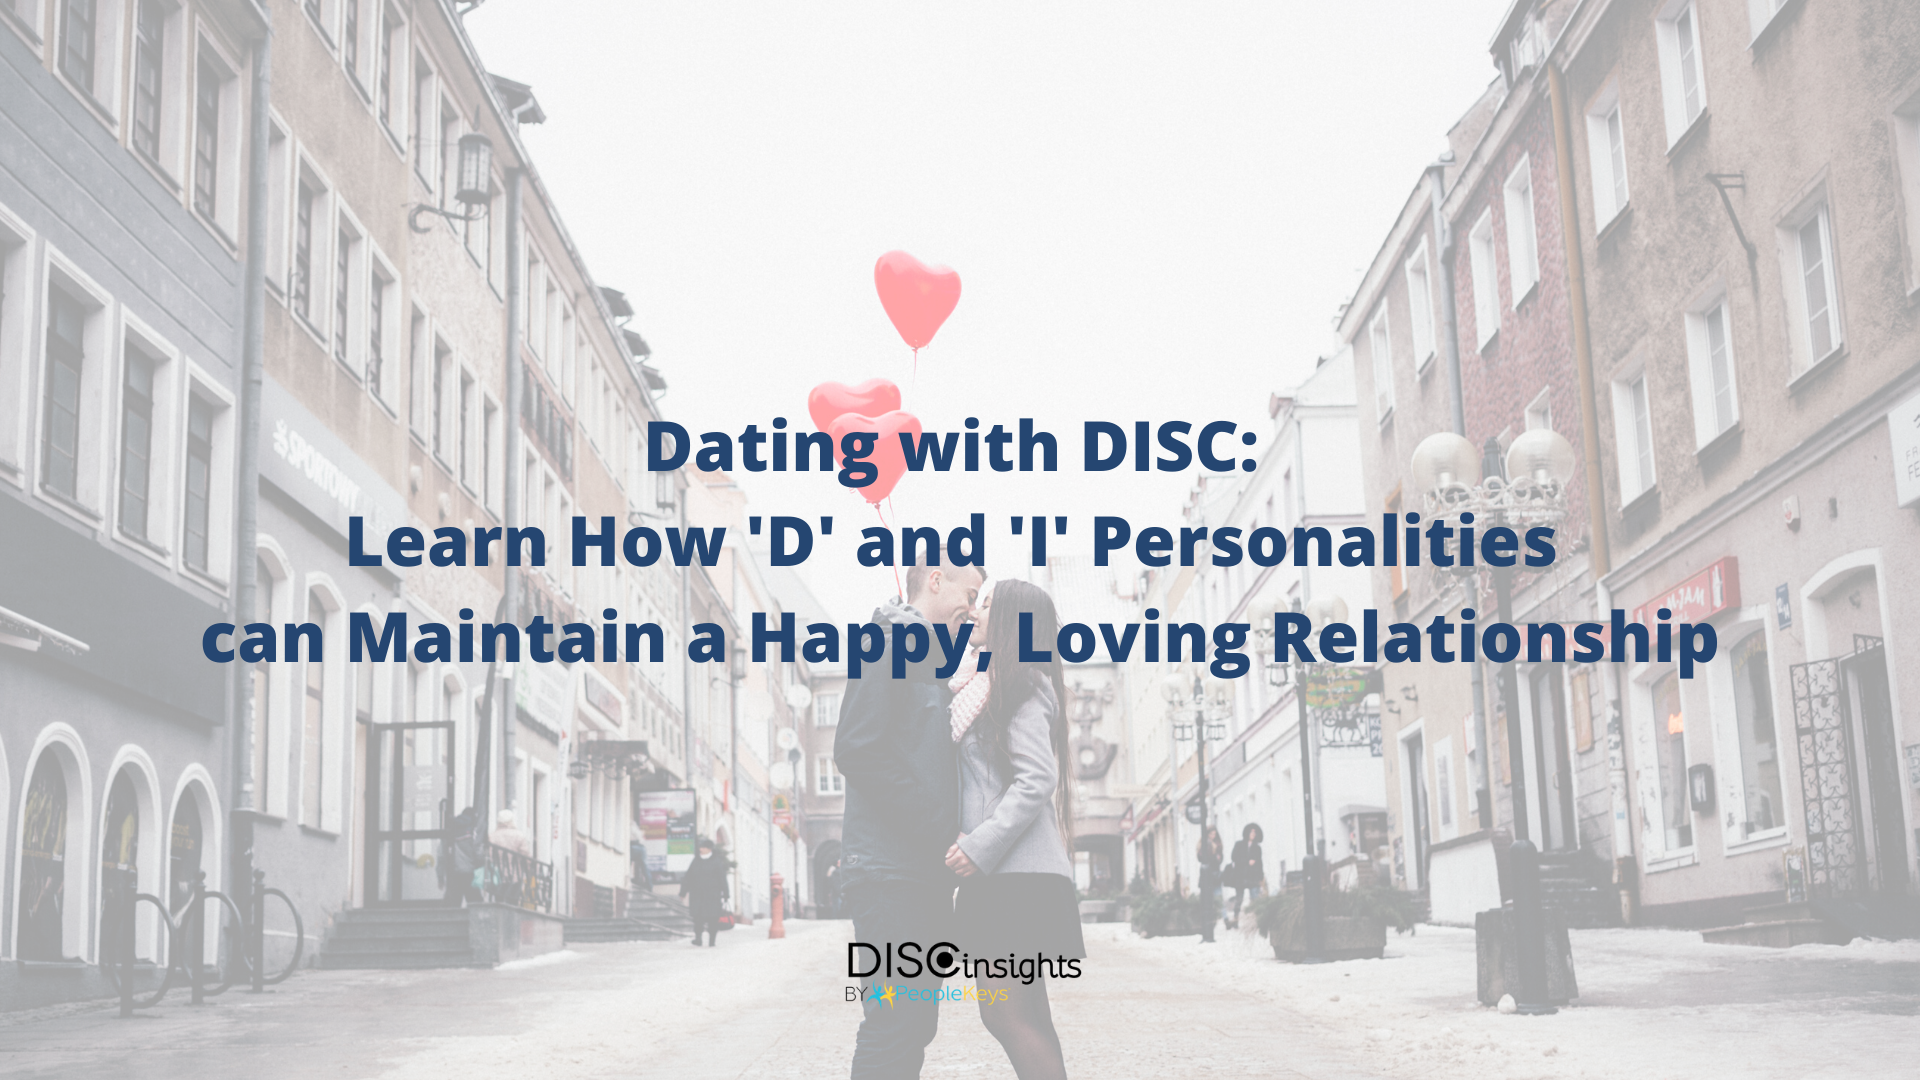 Dating with DISC: Learn How 'D' and 'I' Personalities can Maintain a Happy, Loving Relationship